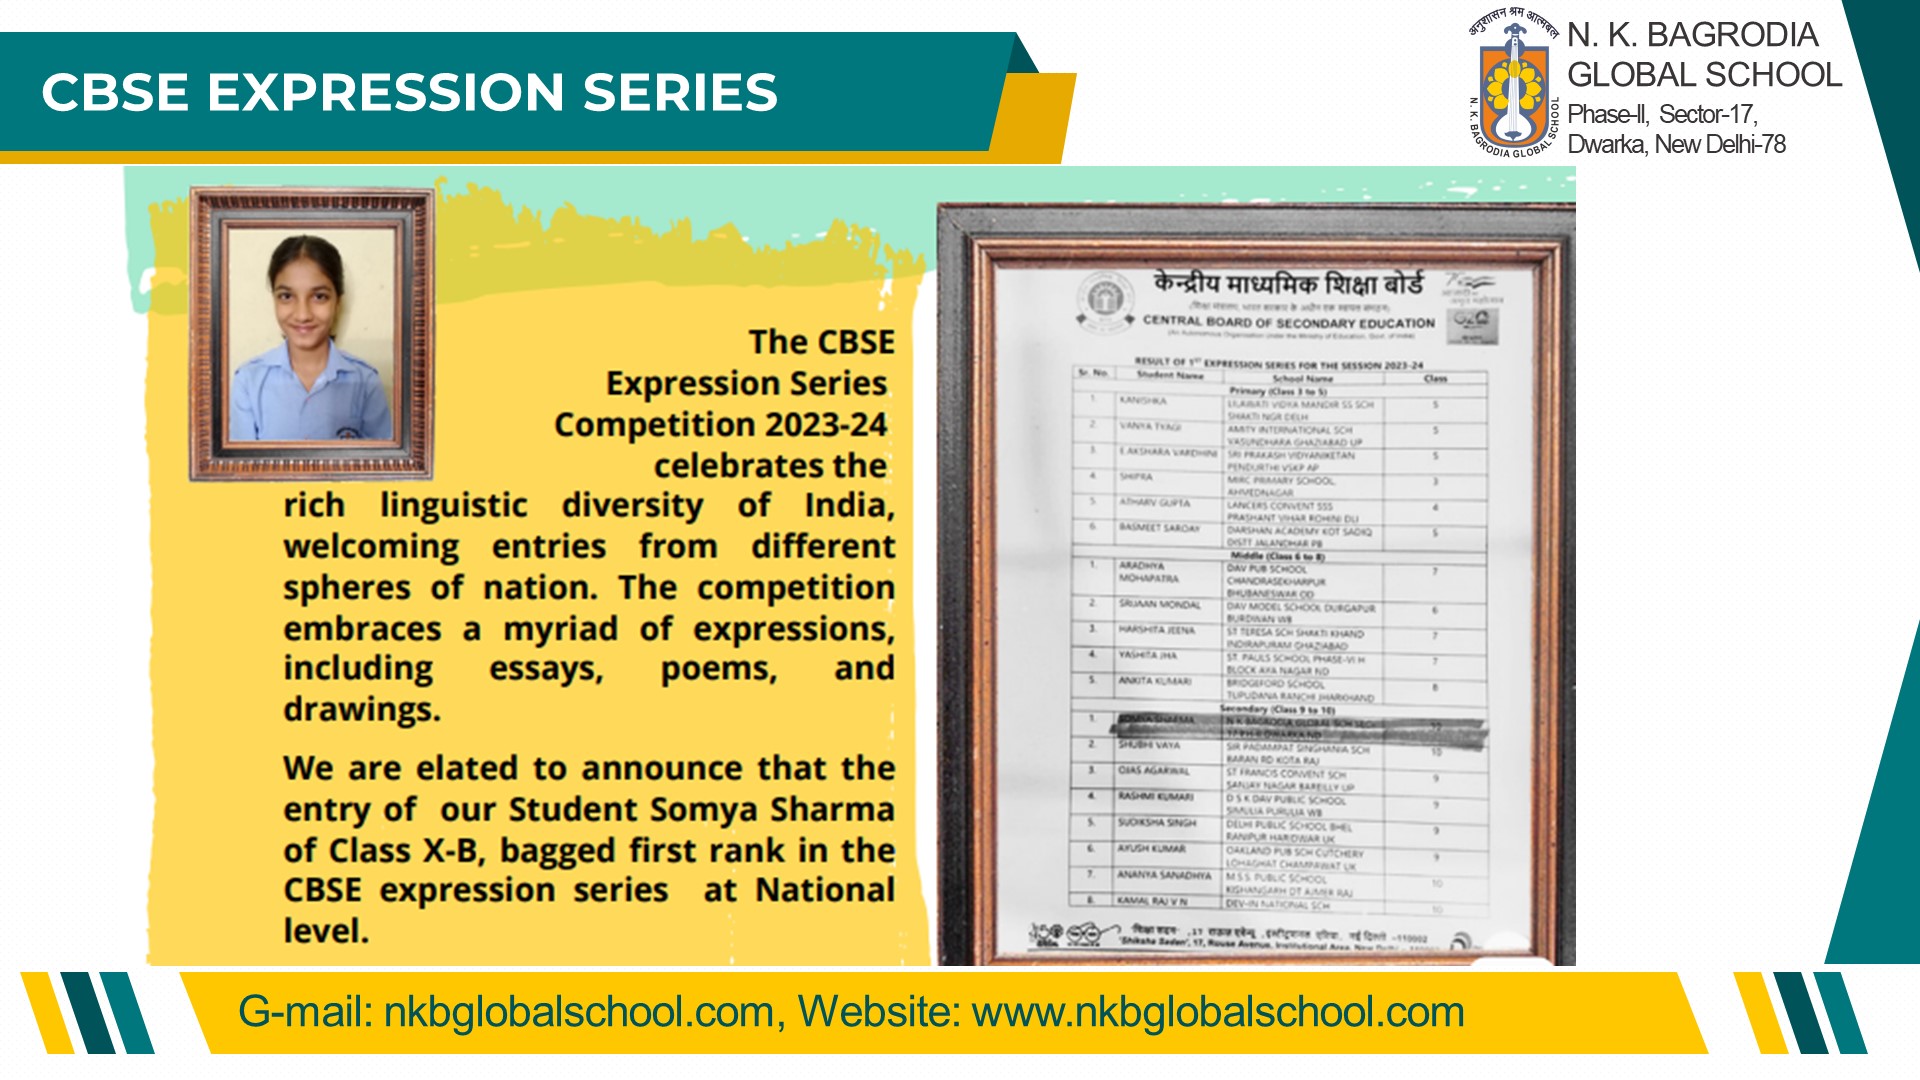 CBSE EXPRESSION SERIES